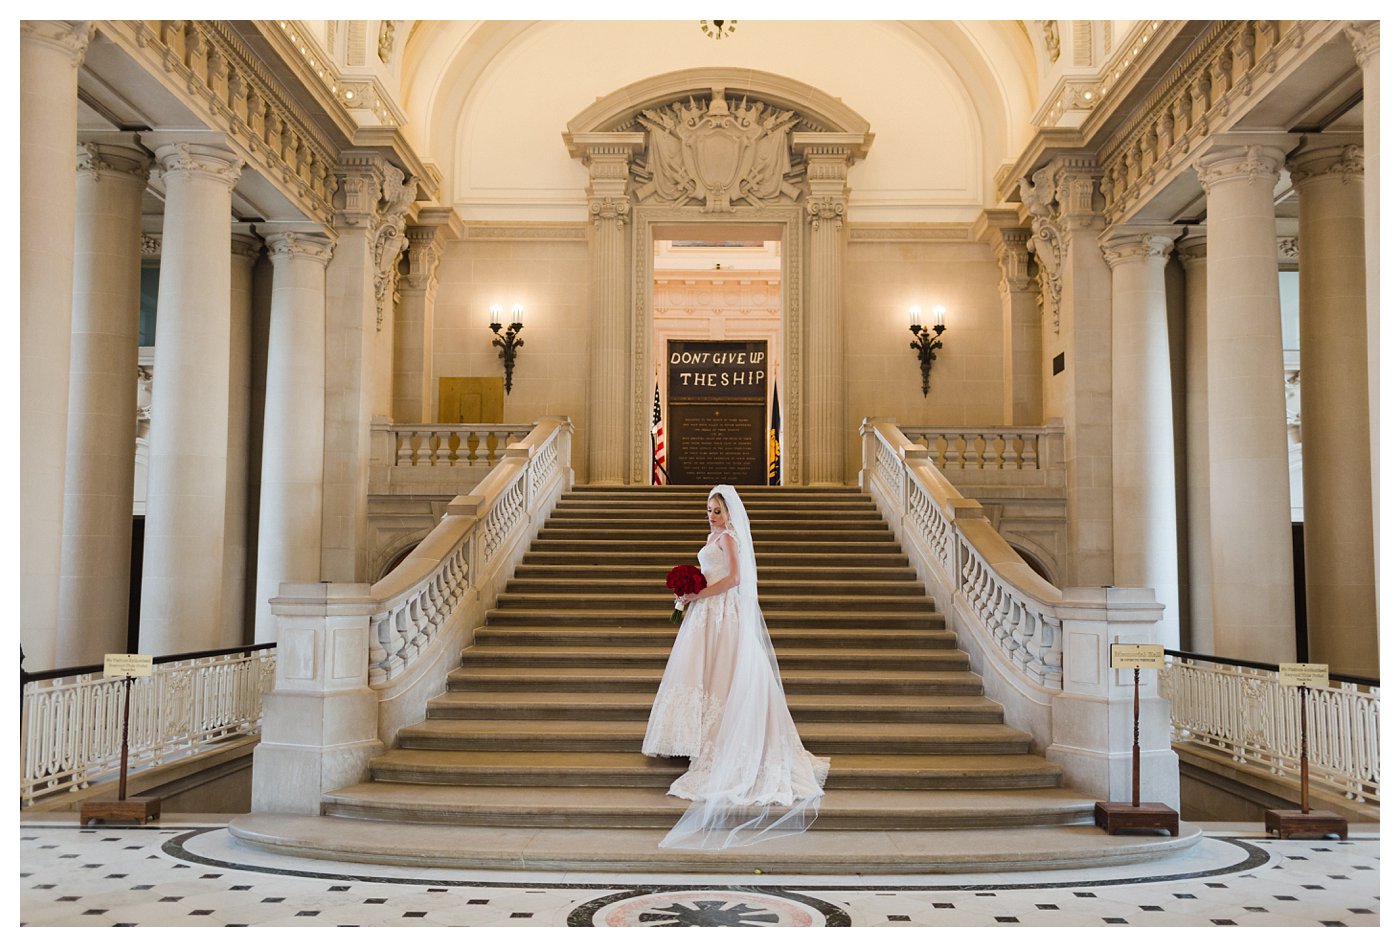 Bridal Portraits in Bancroft Hall at the United States Naval Academy by Amanda and Grady Photography